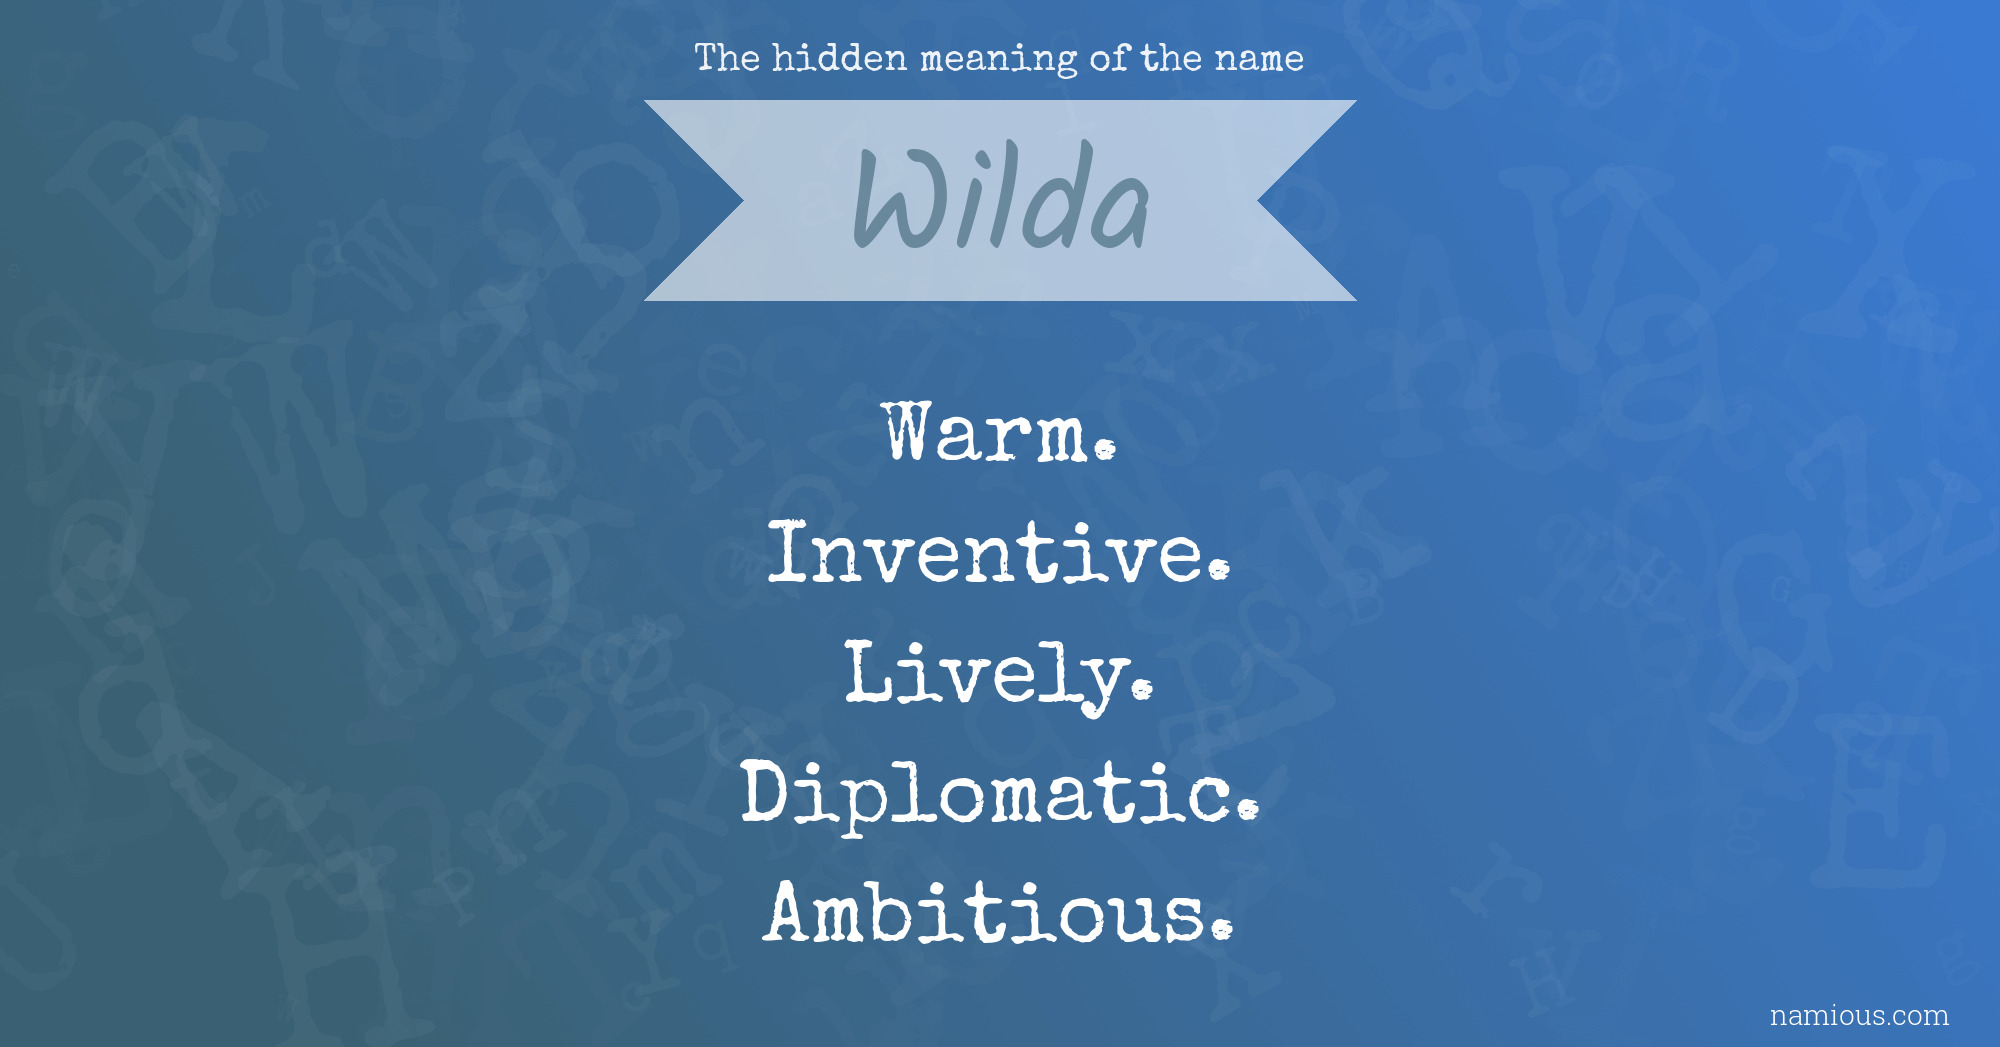 The hidden meaning of the name Wilda